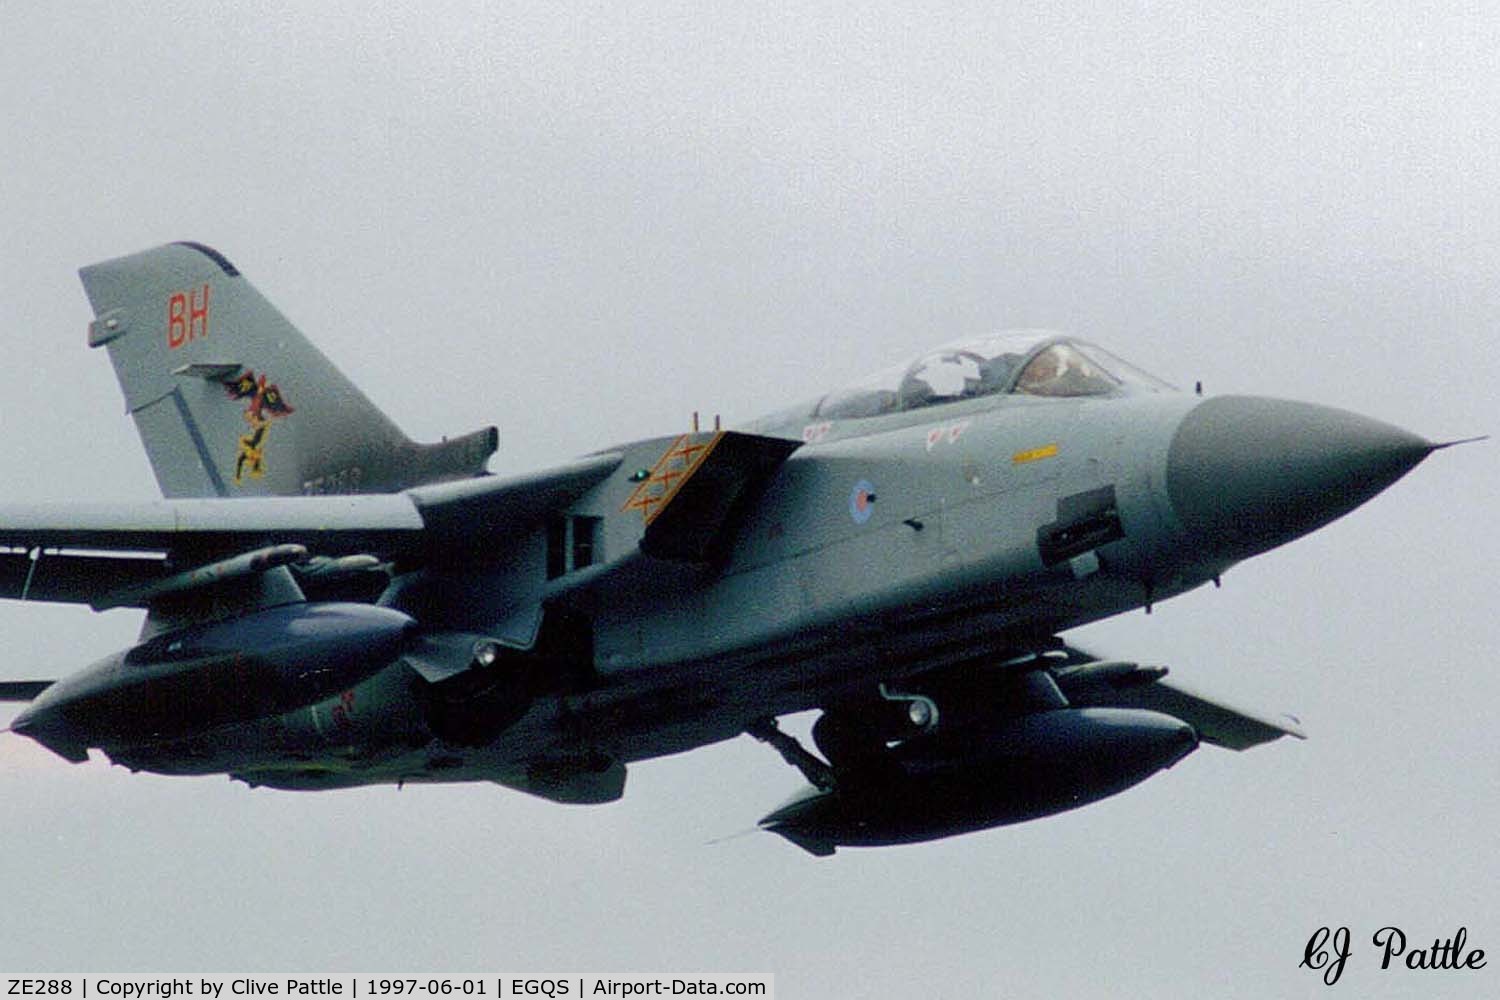 ZE288, 1987 Panavia Tornado F.3 C/N 617/AS035/3275, Coded BH with RAF 29 Sqn take off from RAF Lossiemouth EGQS